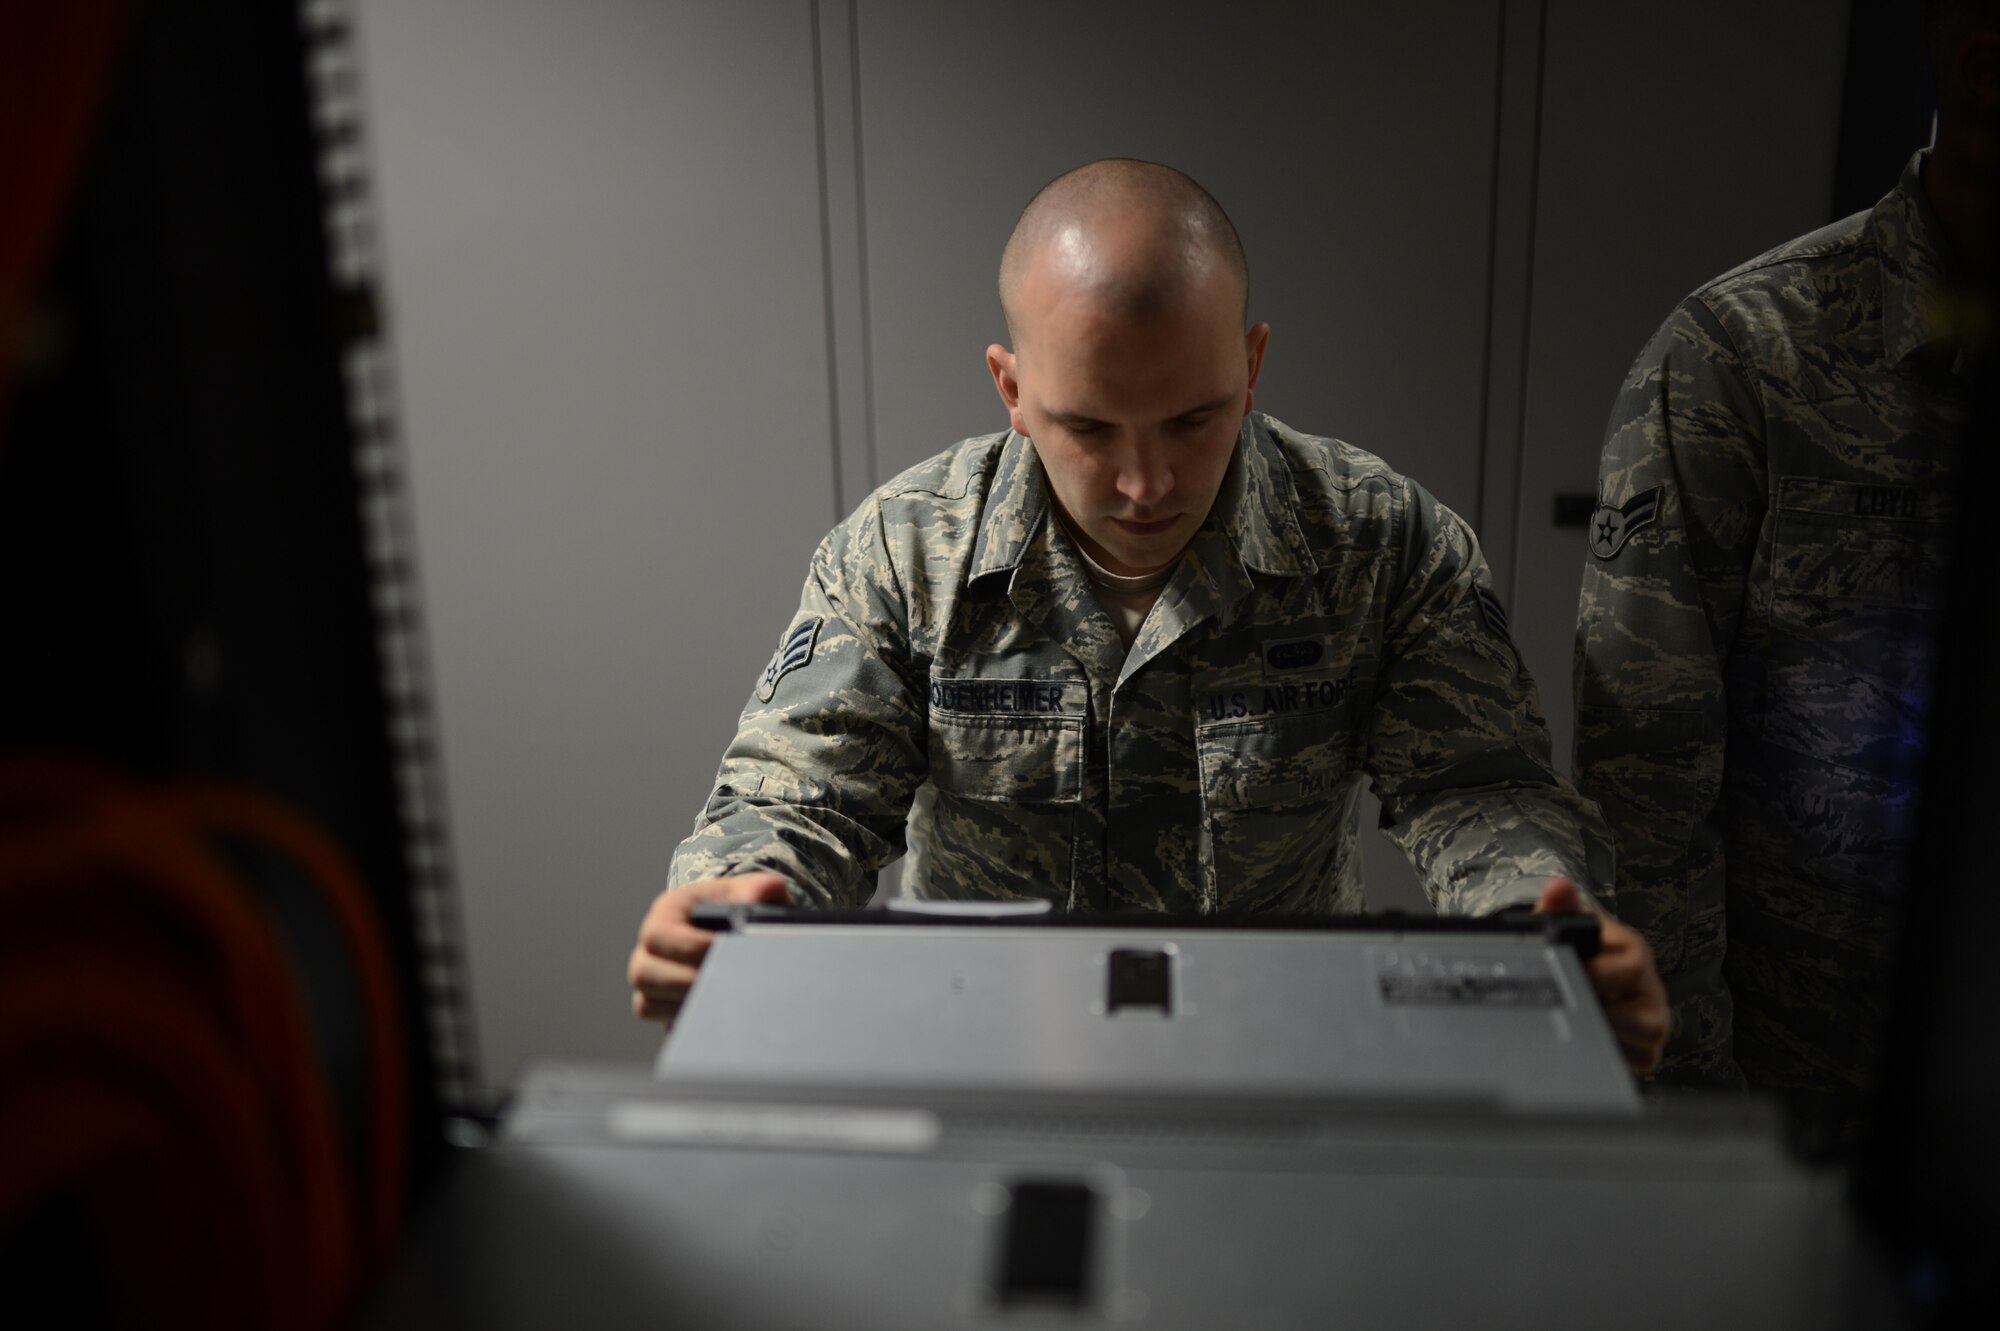 U.S. Air Force Senior Airman Edward Bodenheimer, 52nd Communications Squadron cyber system operations technician from Lumberton, N.C., studies a network server in a server room at Spangdahlem Air Base, Germany, June 10, 2014. The 53 servers and $45 million network supports the base population and geographically separated units totaling more than 4,000 client systems. (U.S. Air Force photo by Senior Airman Gustavo Castillo/Released)